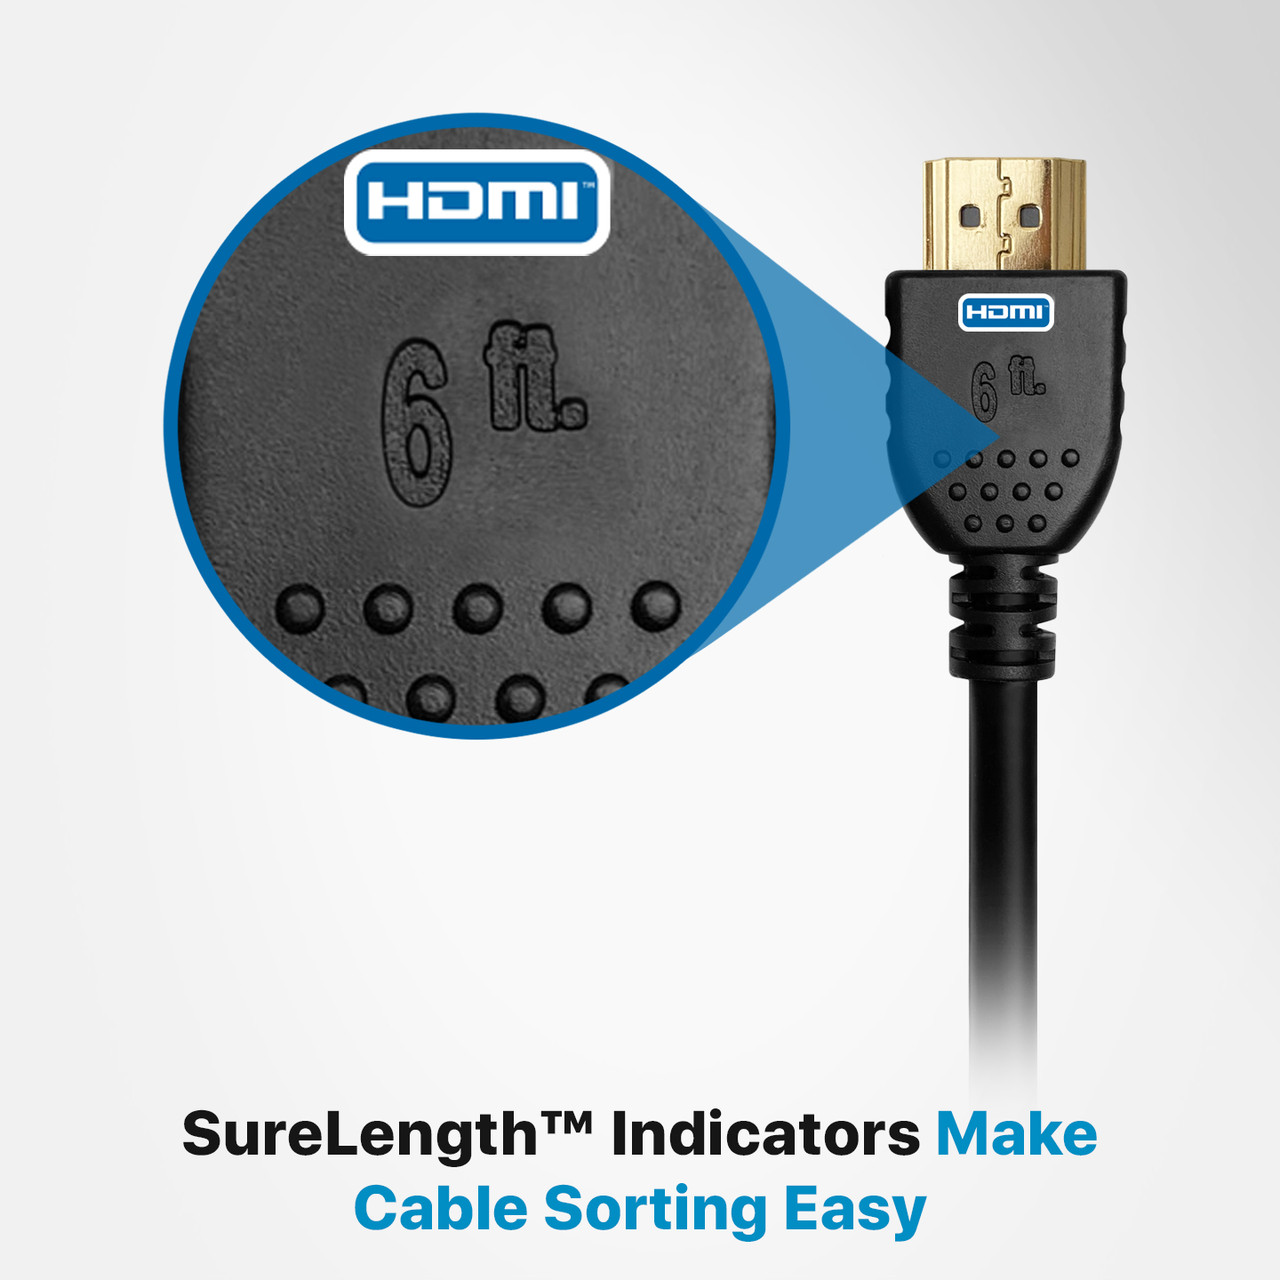 What's the Difference Between SDI, Standard, Mini + Micro HDMI